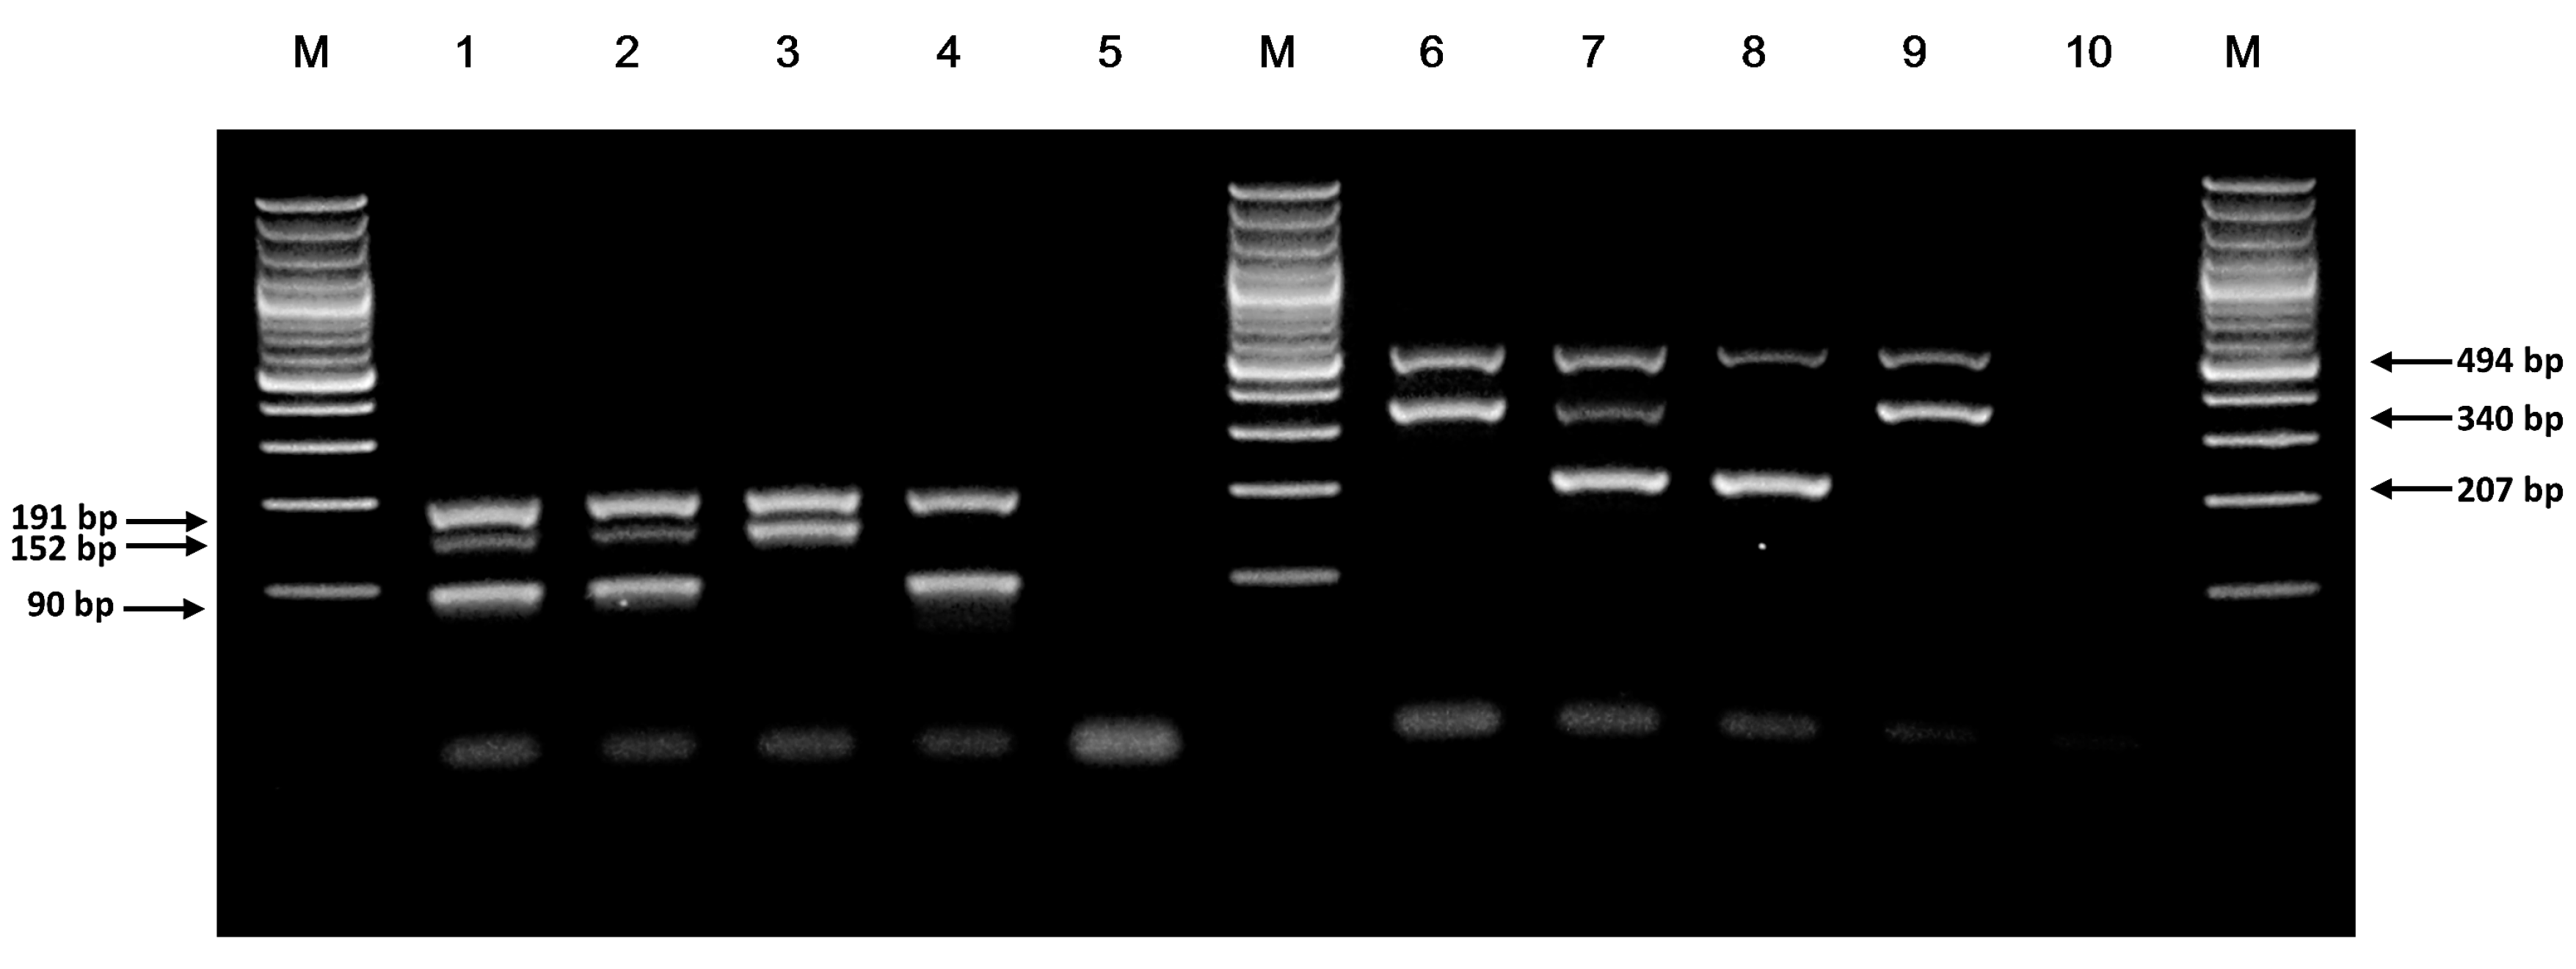 Genes | Free Full-Text | Novel Tetra-Primer ARMS-PCR Assays for Thiopurine  Intolerance Susceptibility Mutations NUDT15 c.415C&gt;T and TPMT  c.719A&gt;G (TPMT*3C) in East Asians